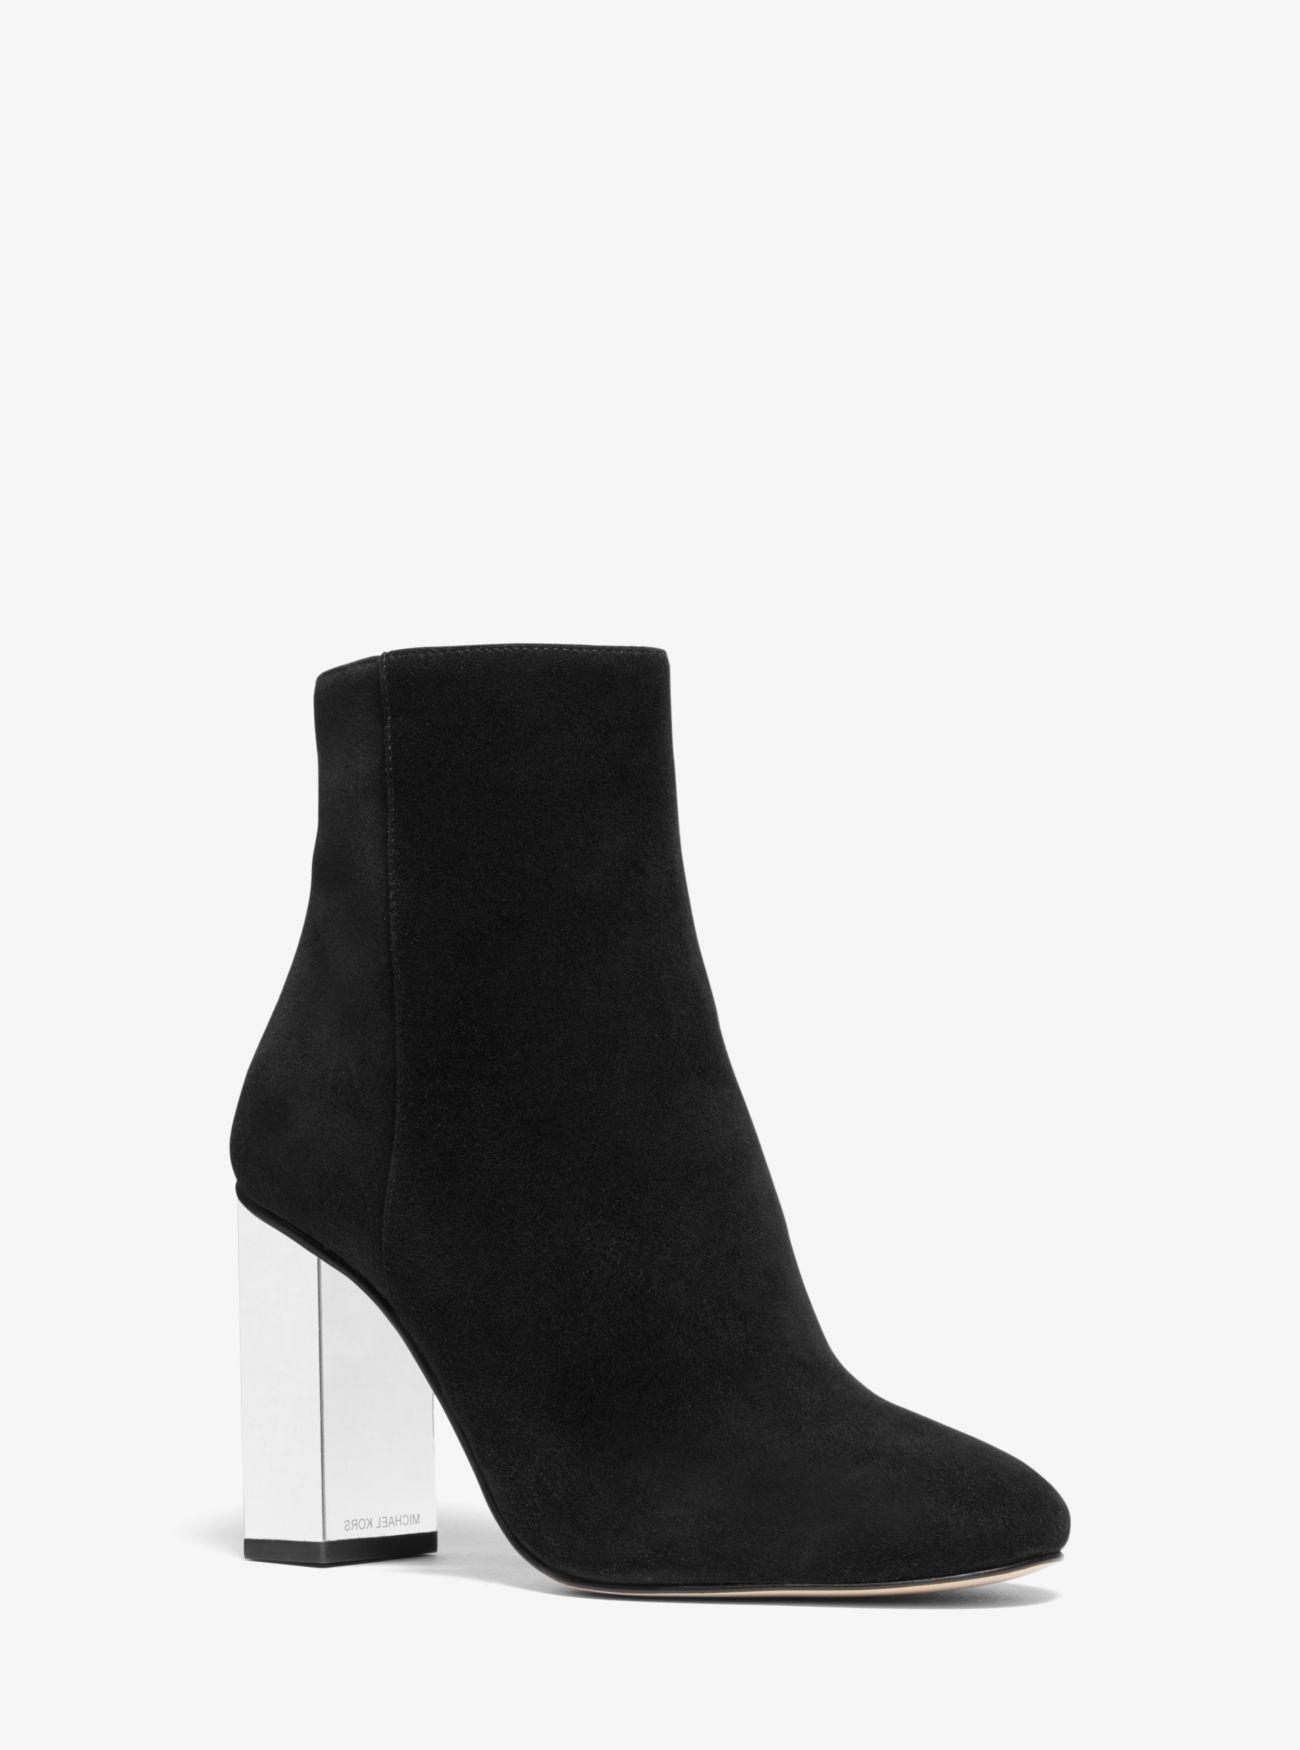 Michael Kors Petra Embellished Suede Ankle Boot in Black - Lyst